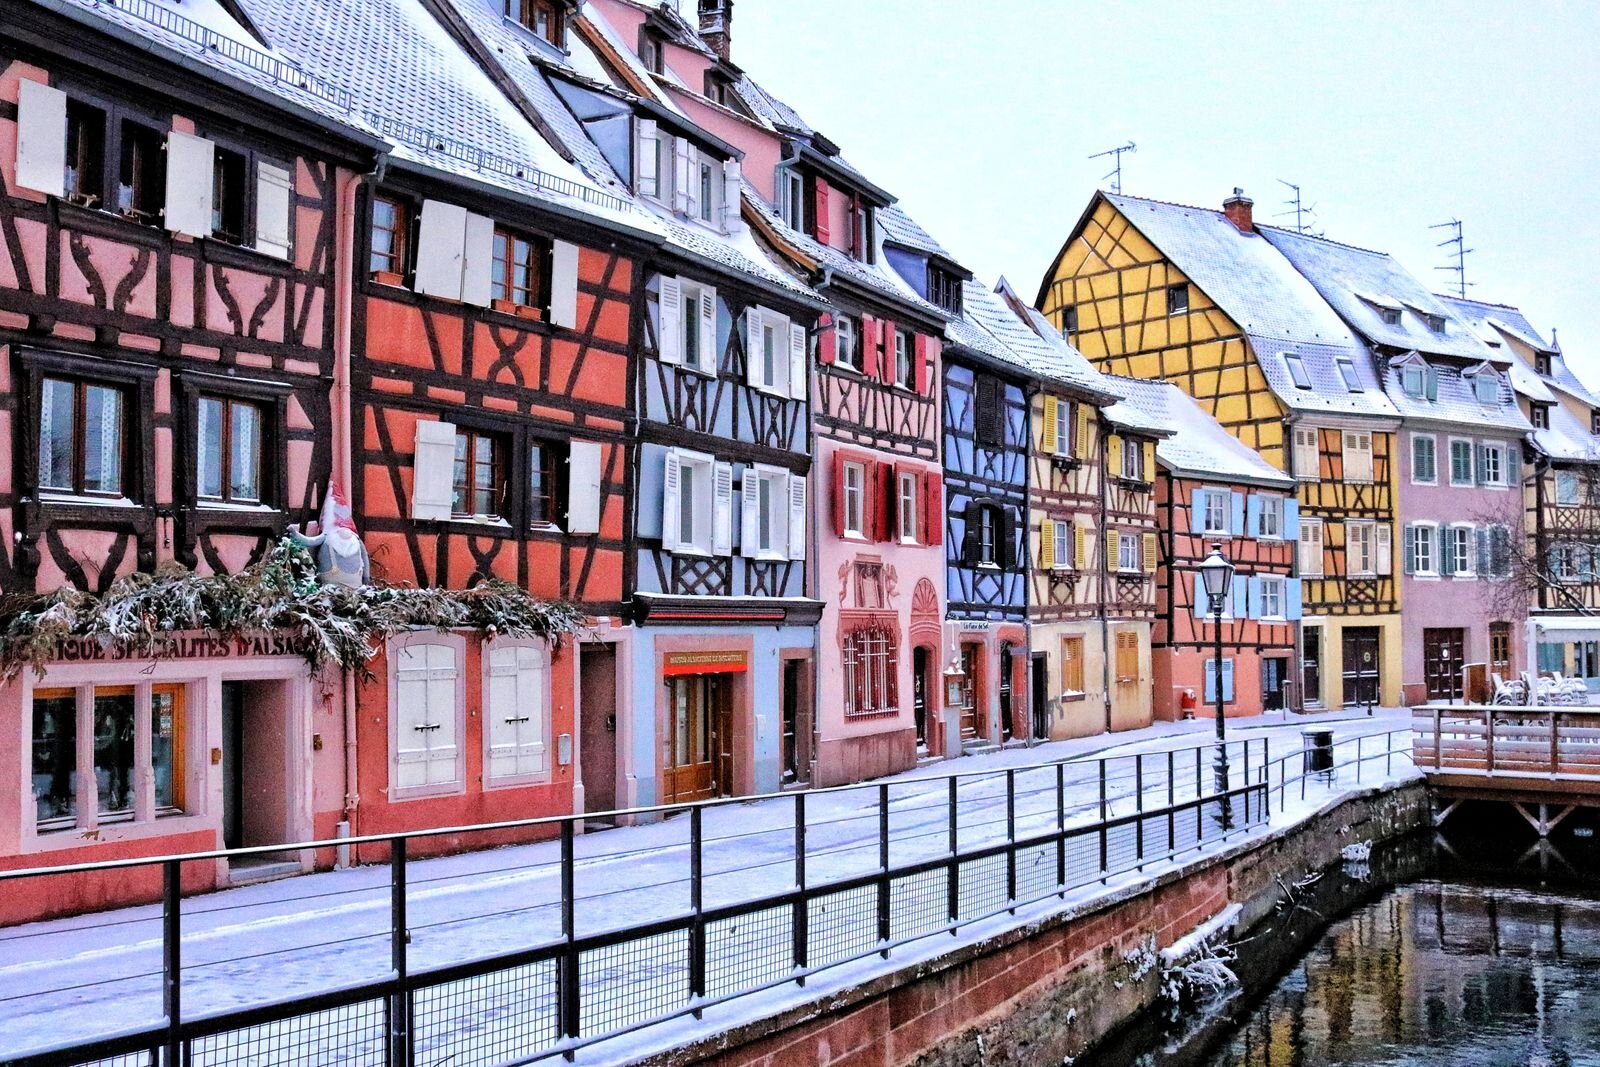 Colourful Alsace timber frame houses in Colmar in the snow